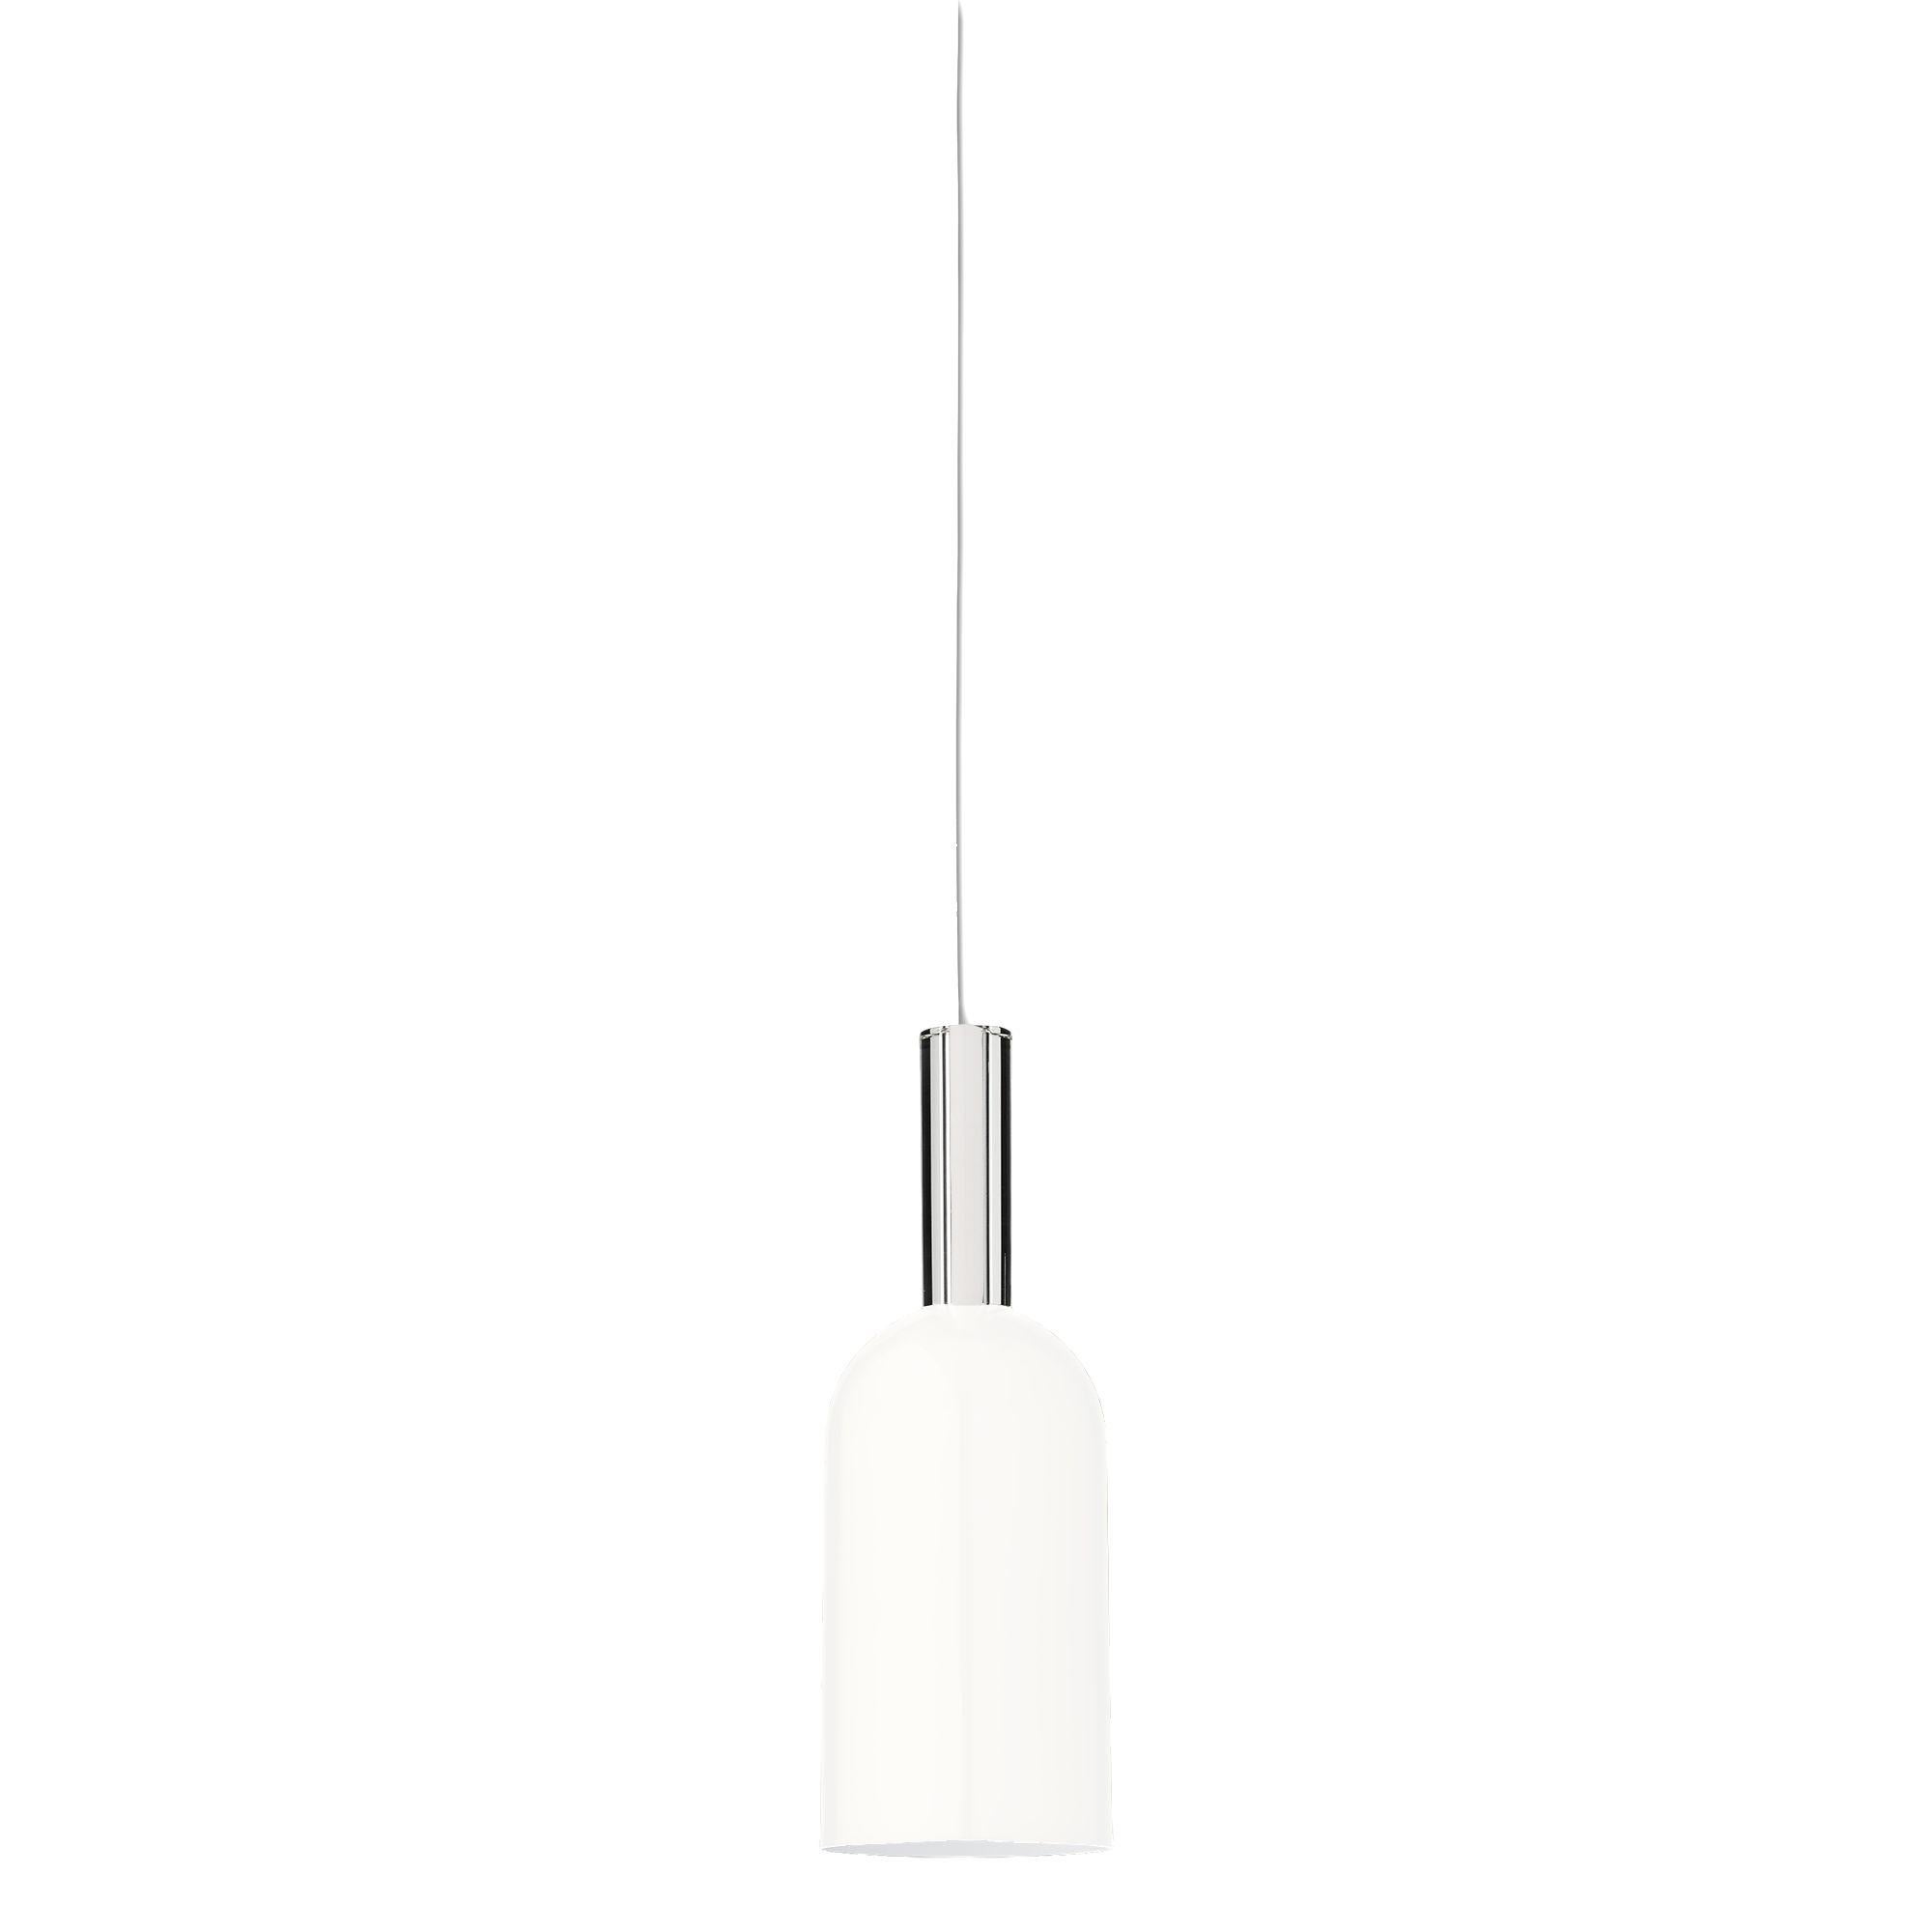 White cylinder pendant lamp
Dimensions: Diameter 12 x heighr 35 cm 
Materials: Glass, iron w. Brass plating & powder coating.
Details: For all lamps, the recommended light source is E27 max 25W&220/240 voltage. We recommend LED in order to avoid